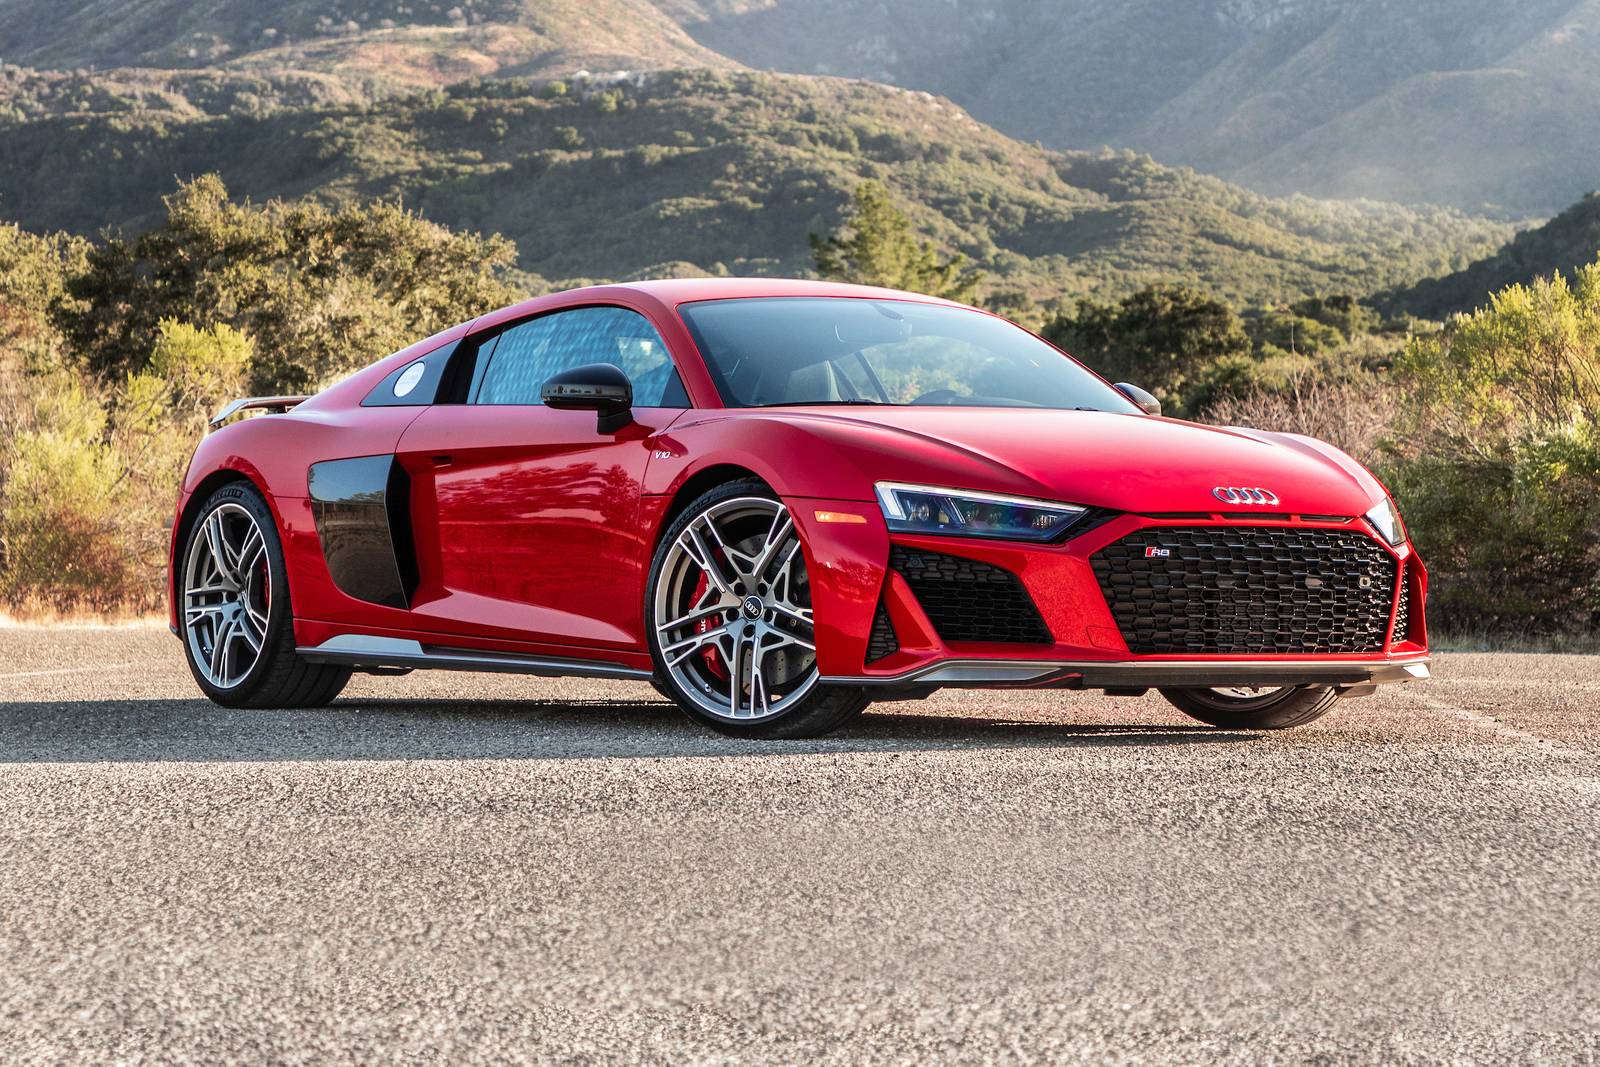 How To Hire A Audi R8 In Dubai